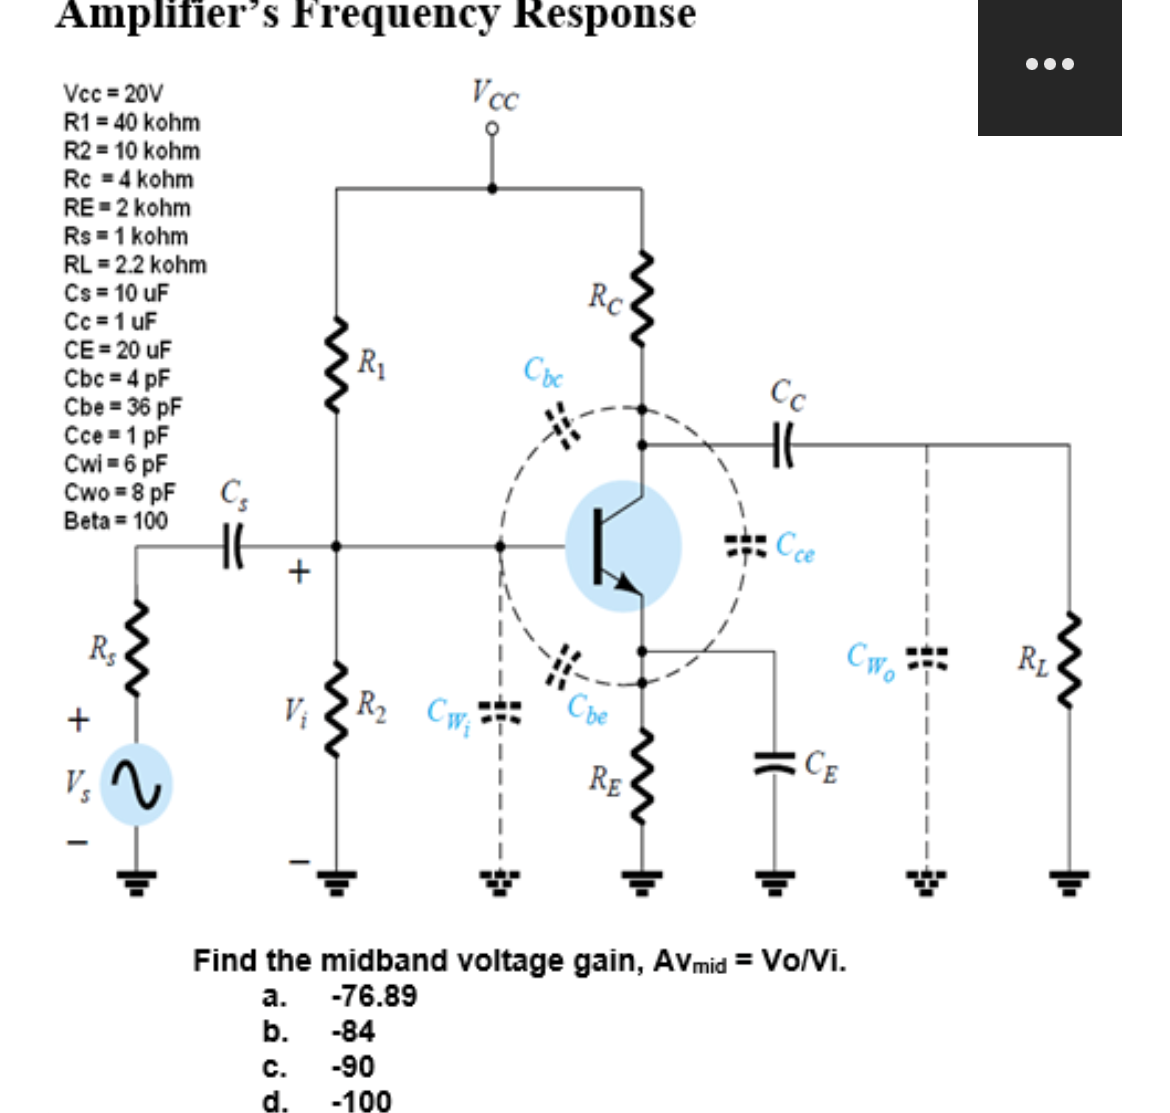 Amplifier's Frequency Response
Vcc=20V
R1 = 40 kohm
R2 = 10 kohm
Rc = 4 kohm
RE=2 kohm
Rs = 1 kohm
RL = 2.2 kohm
Cs = 10 uF
Cc=1 uF
CE=20 uF
Cbc = 4 pF
Cbe = 36 pF
Cce=1 pF
Cwi= 6 pF
Cwo=8 pF
Beta = 100
+
R₂
2
Cs
+
R₁
C.
d.
Vcc
R₂ Cw₁
-84
-90
-100
Cbc
Rc
Che
RE
Cc
Ссе
Find the midband voltage gain, AVmid = Vo/Vi.
a.
-76.89
b.
CE
Cwo
}
●●●
RL